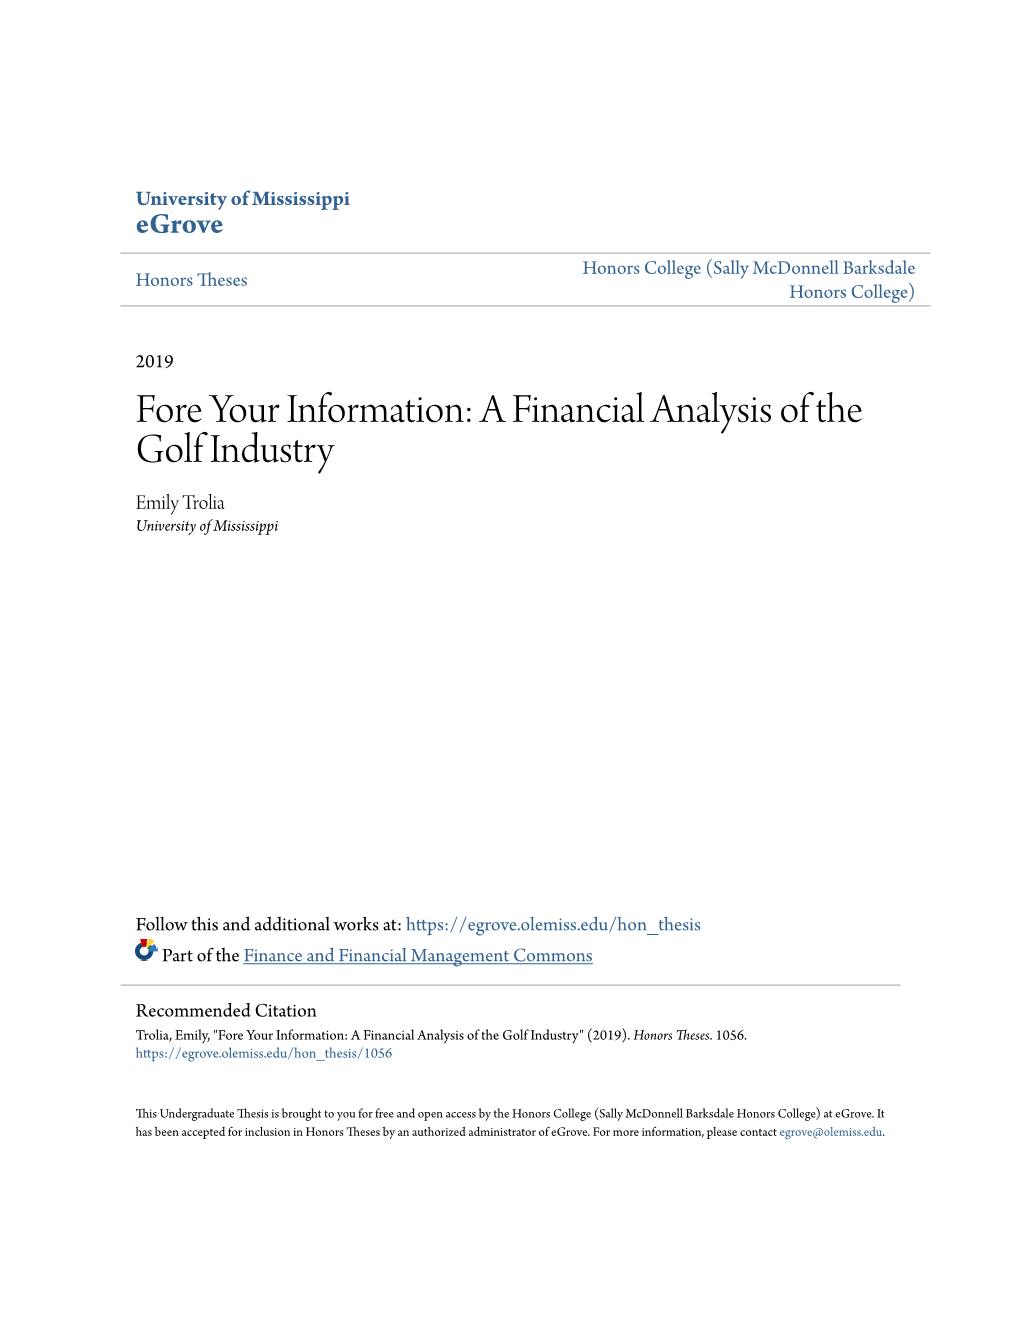 Fore Your Information: a Financial Analysis of the Golf Industry Emily Trolia University of Mississippi